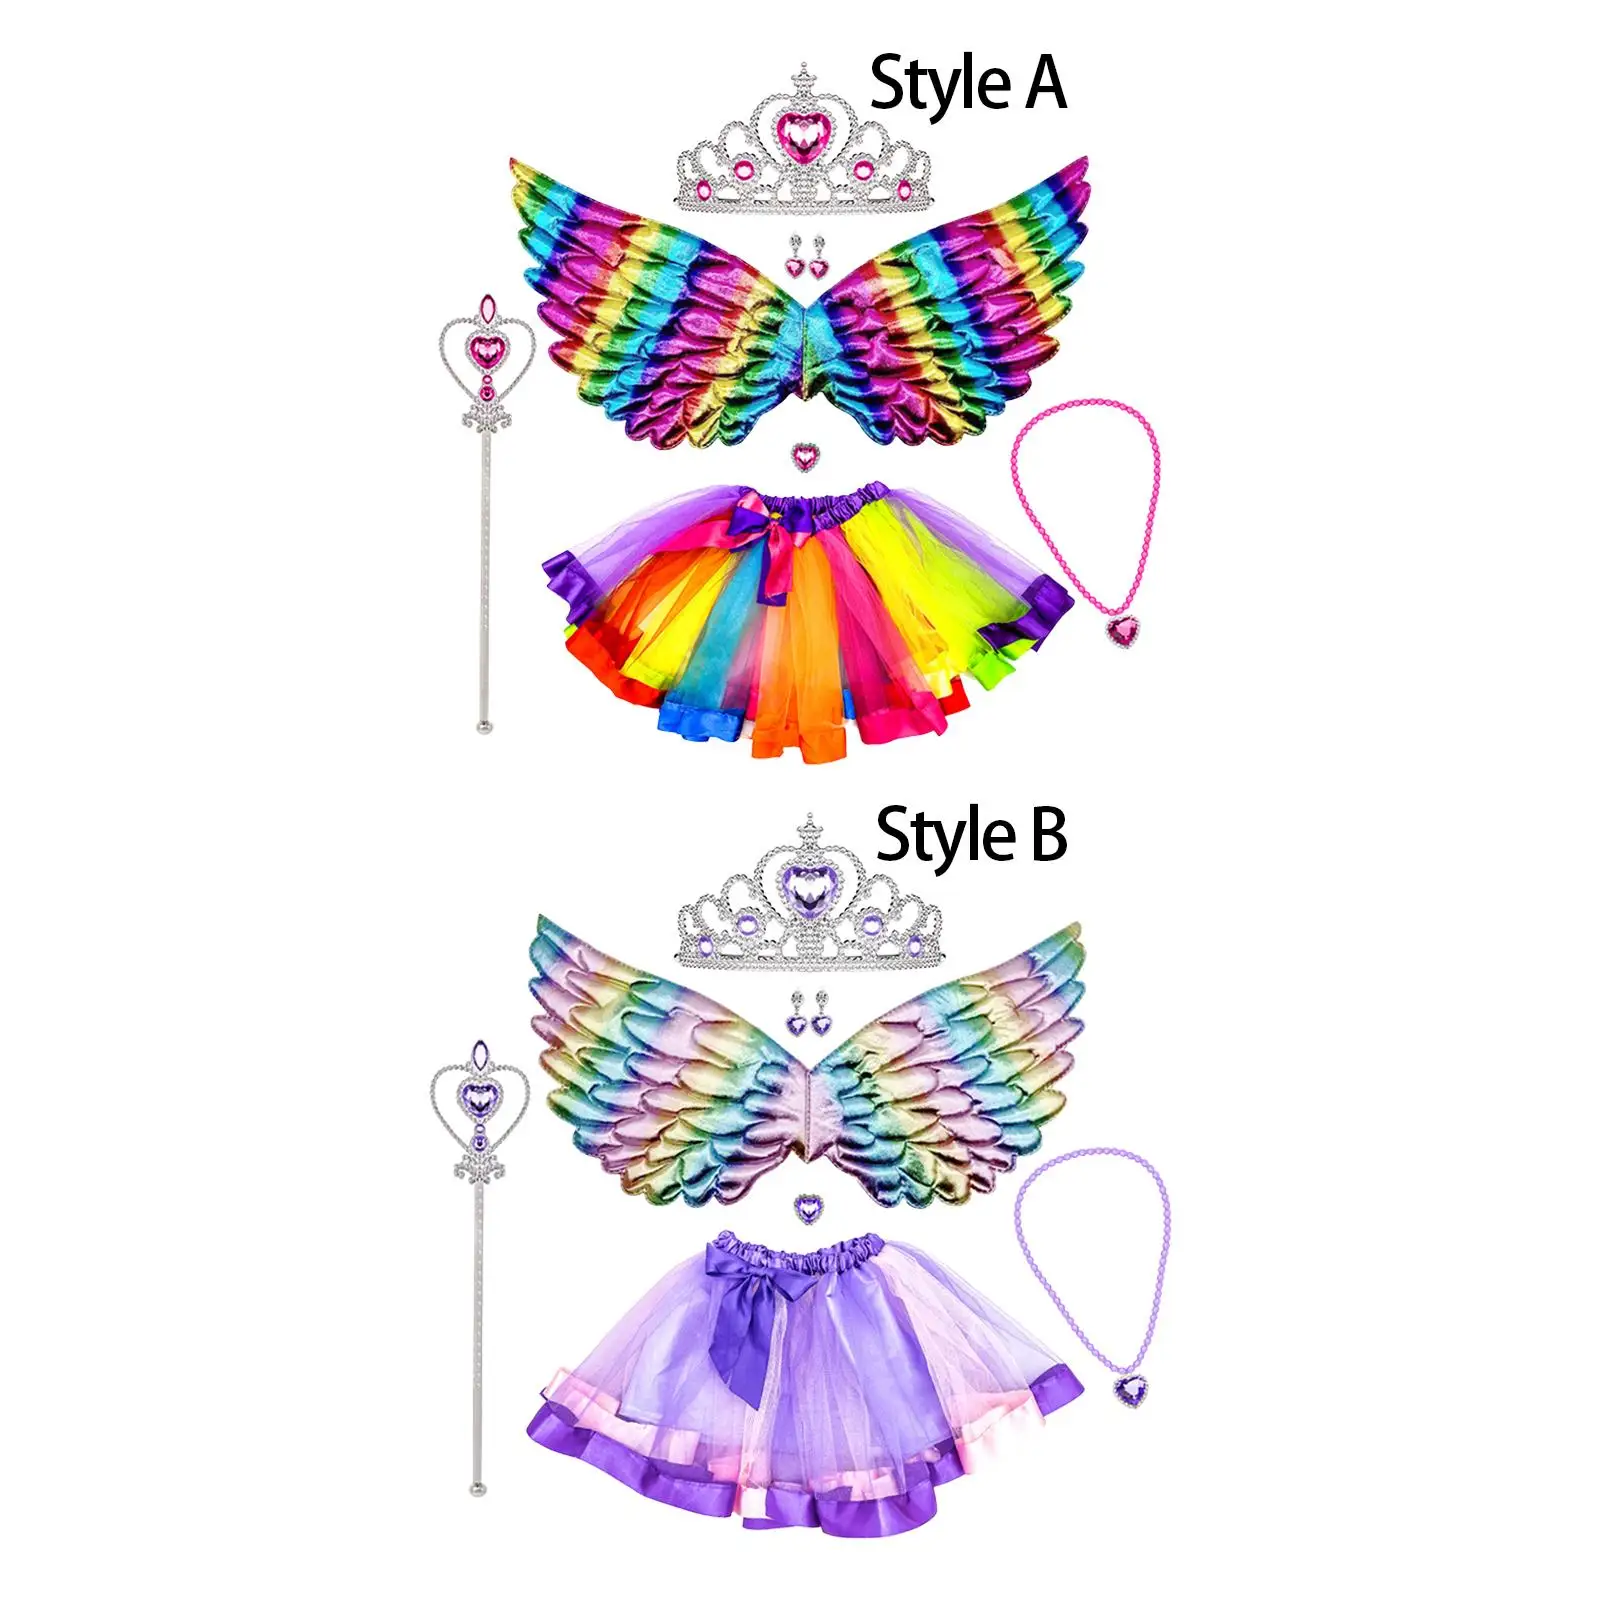 Fairy Costumes for Girls Cosplay Child Dress up Princess Tutu Skirts for Halloween Carnivals Nightclub Festival Masquerade